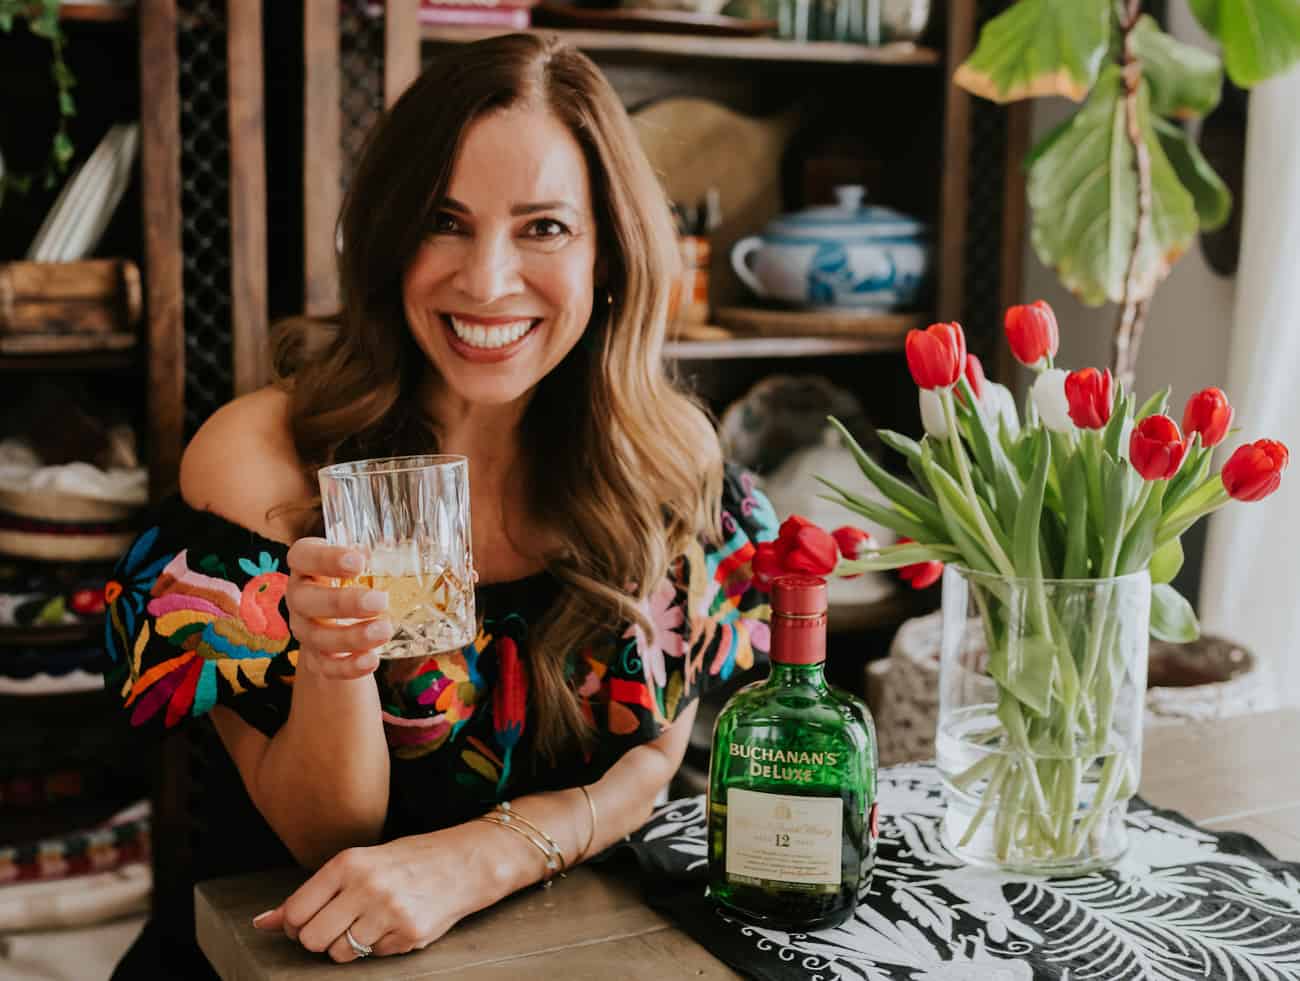 Yvette Marquez Latina Colorado food blogger holding a rocks glass of whisky with a bottle Buchanan and vase of tulips on the side.